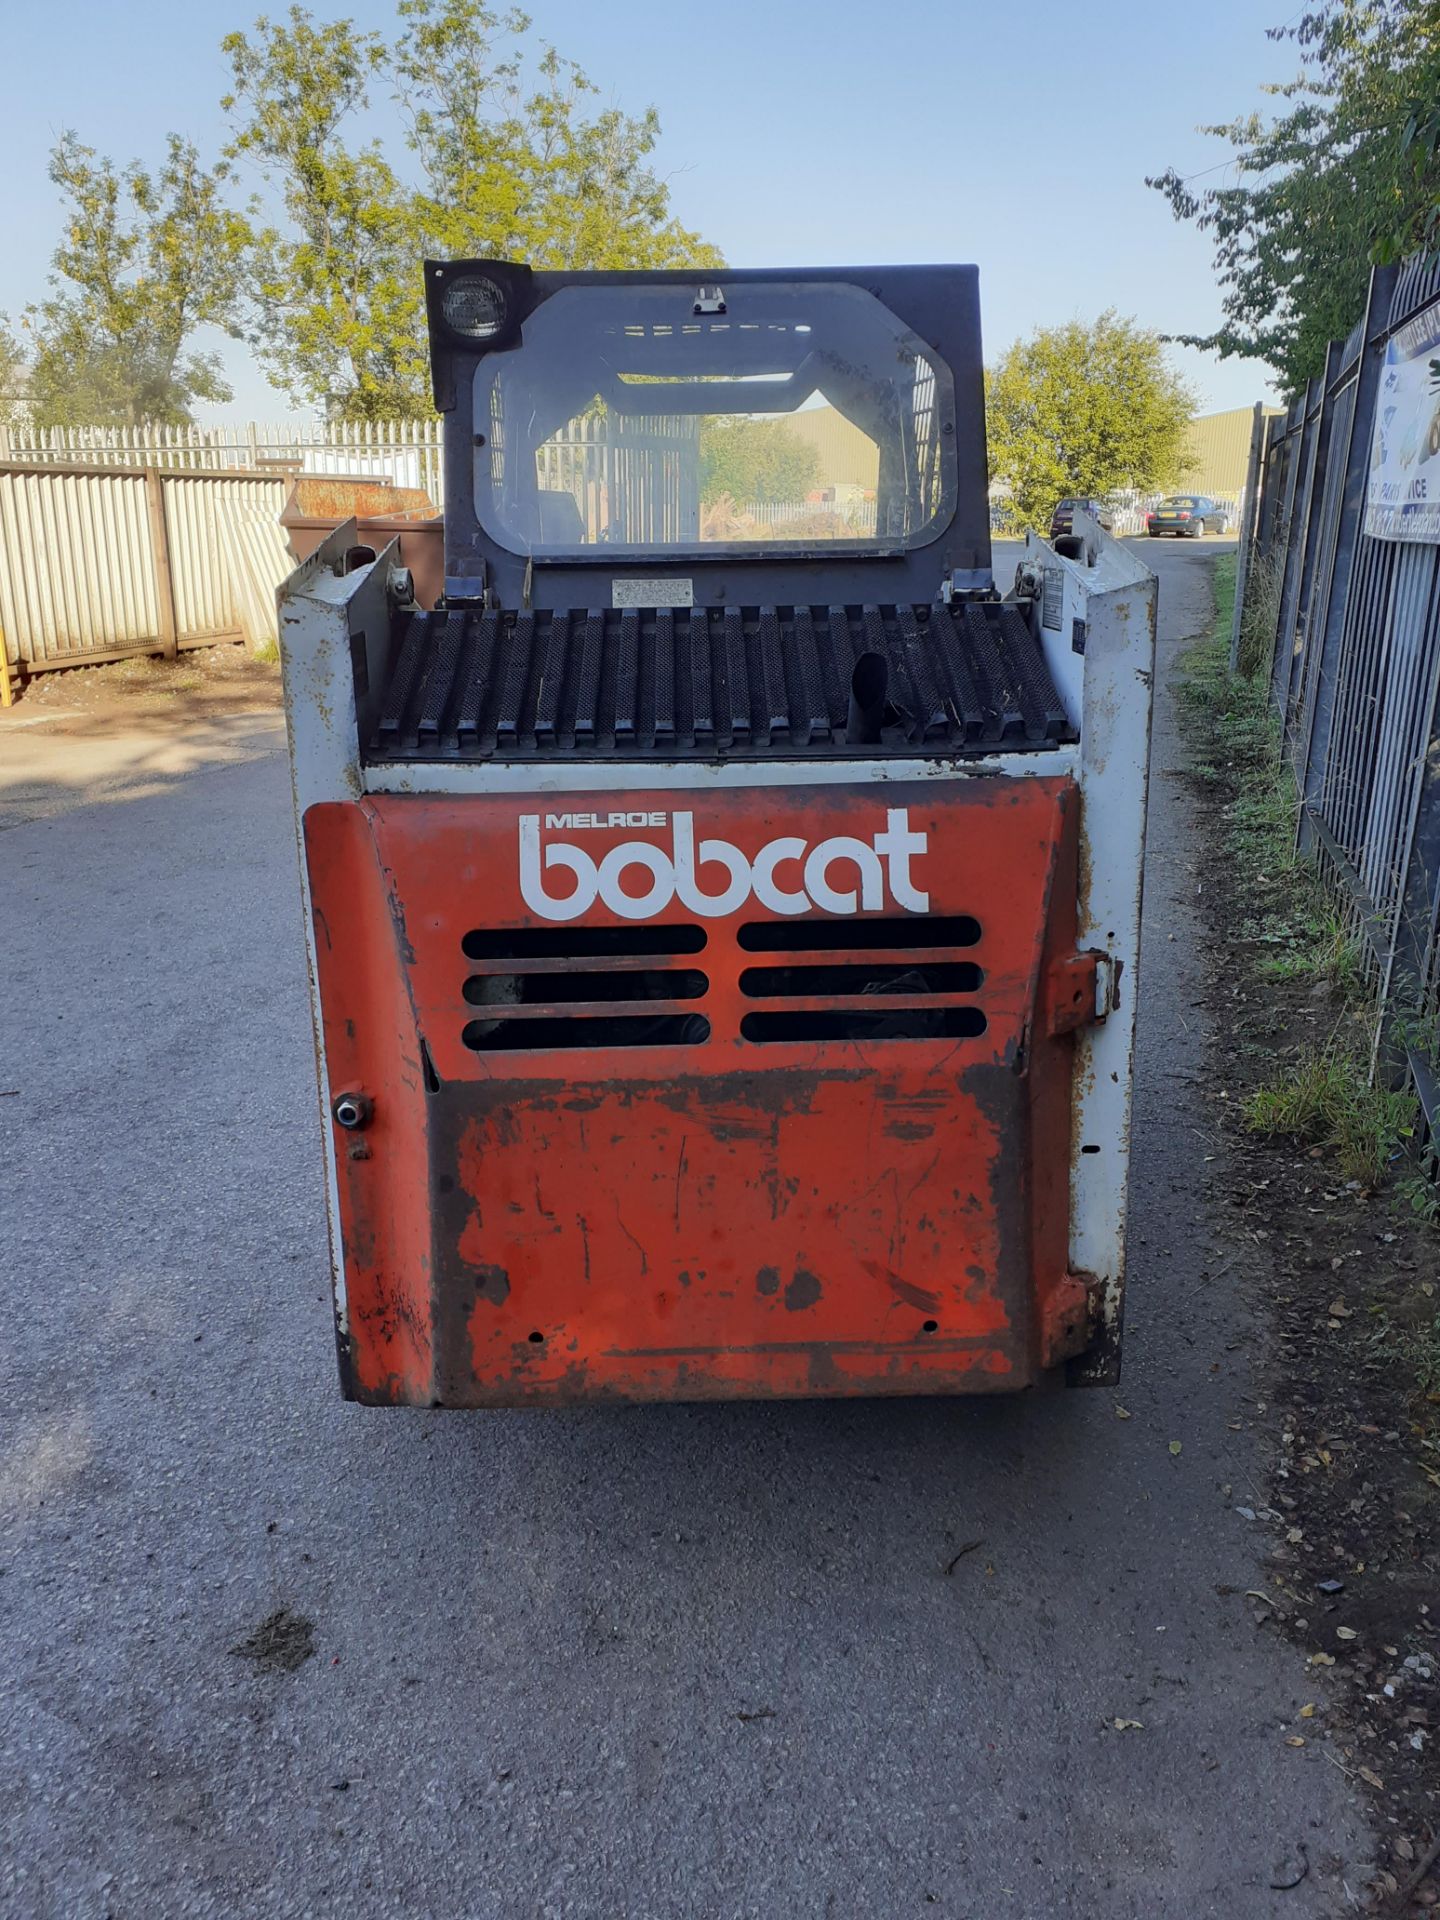 BOBCAT 643 SKID STEER, 5444 HOURS, USED CONDITION - STRAIGHT OFF A FARM *PLUS VAT* - Image 4 of 6